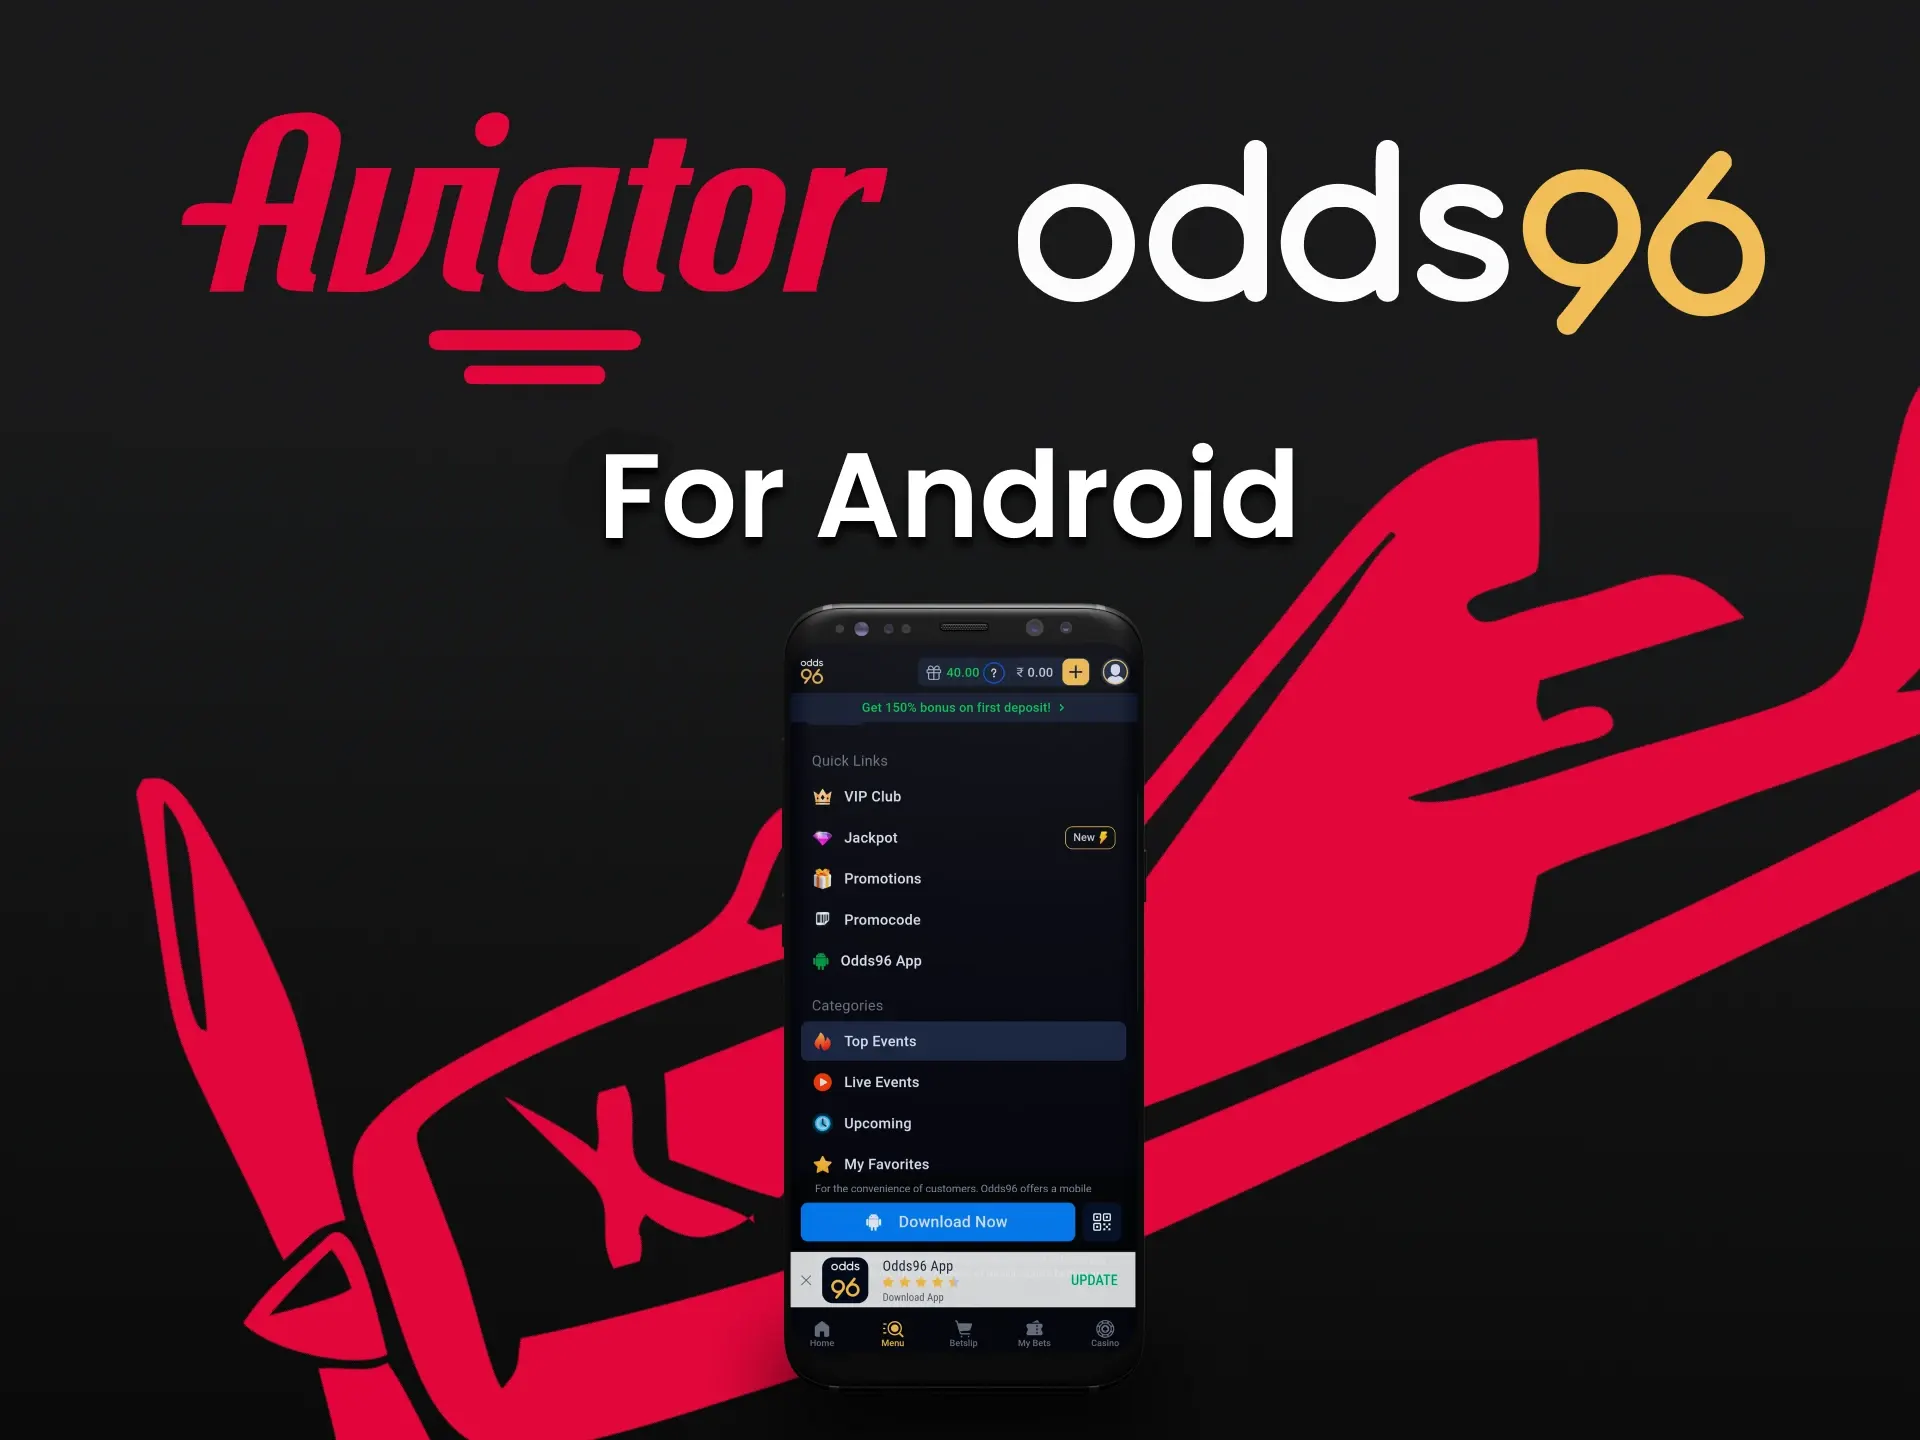 To play Aviator, install the Odds96 application on your Android device.